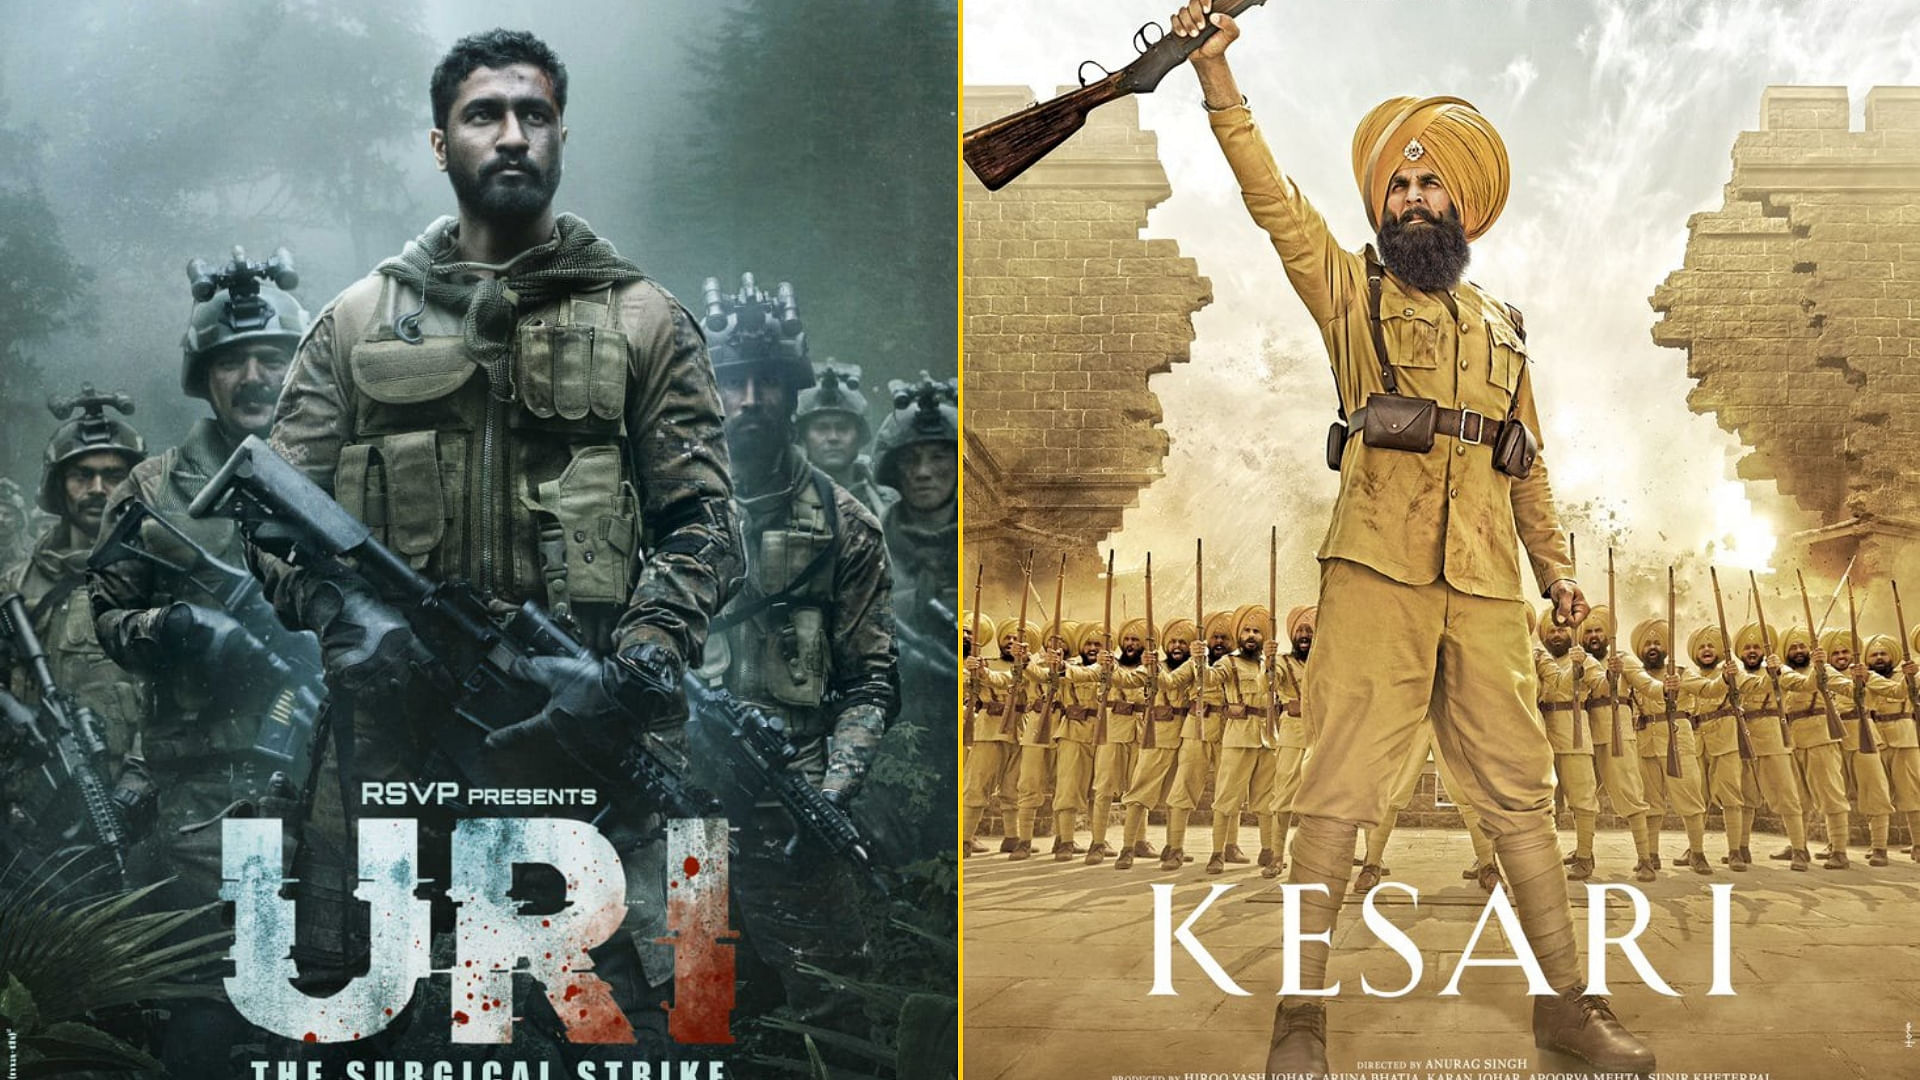 <i>Uri: The Surgical Strike</i> and <i>Kesari</i> are some of the patriotic films from Bollywood in 2019.